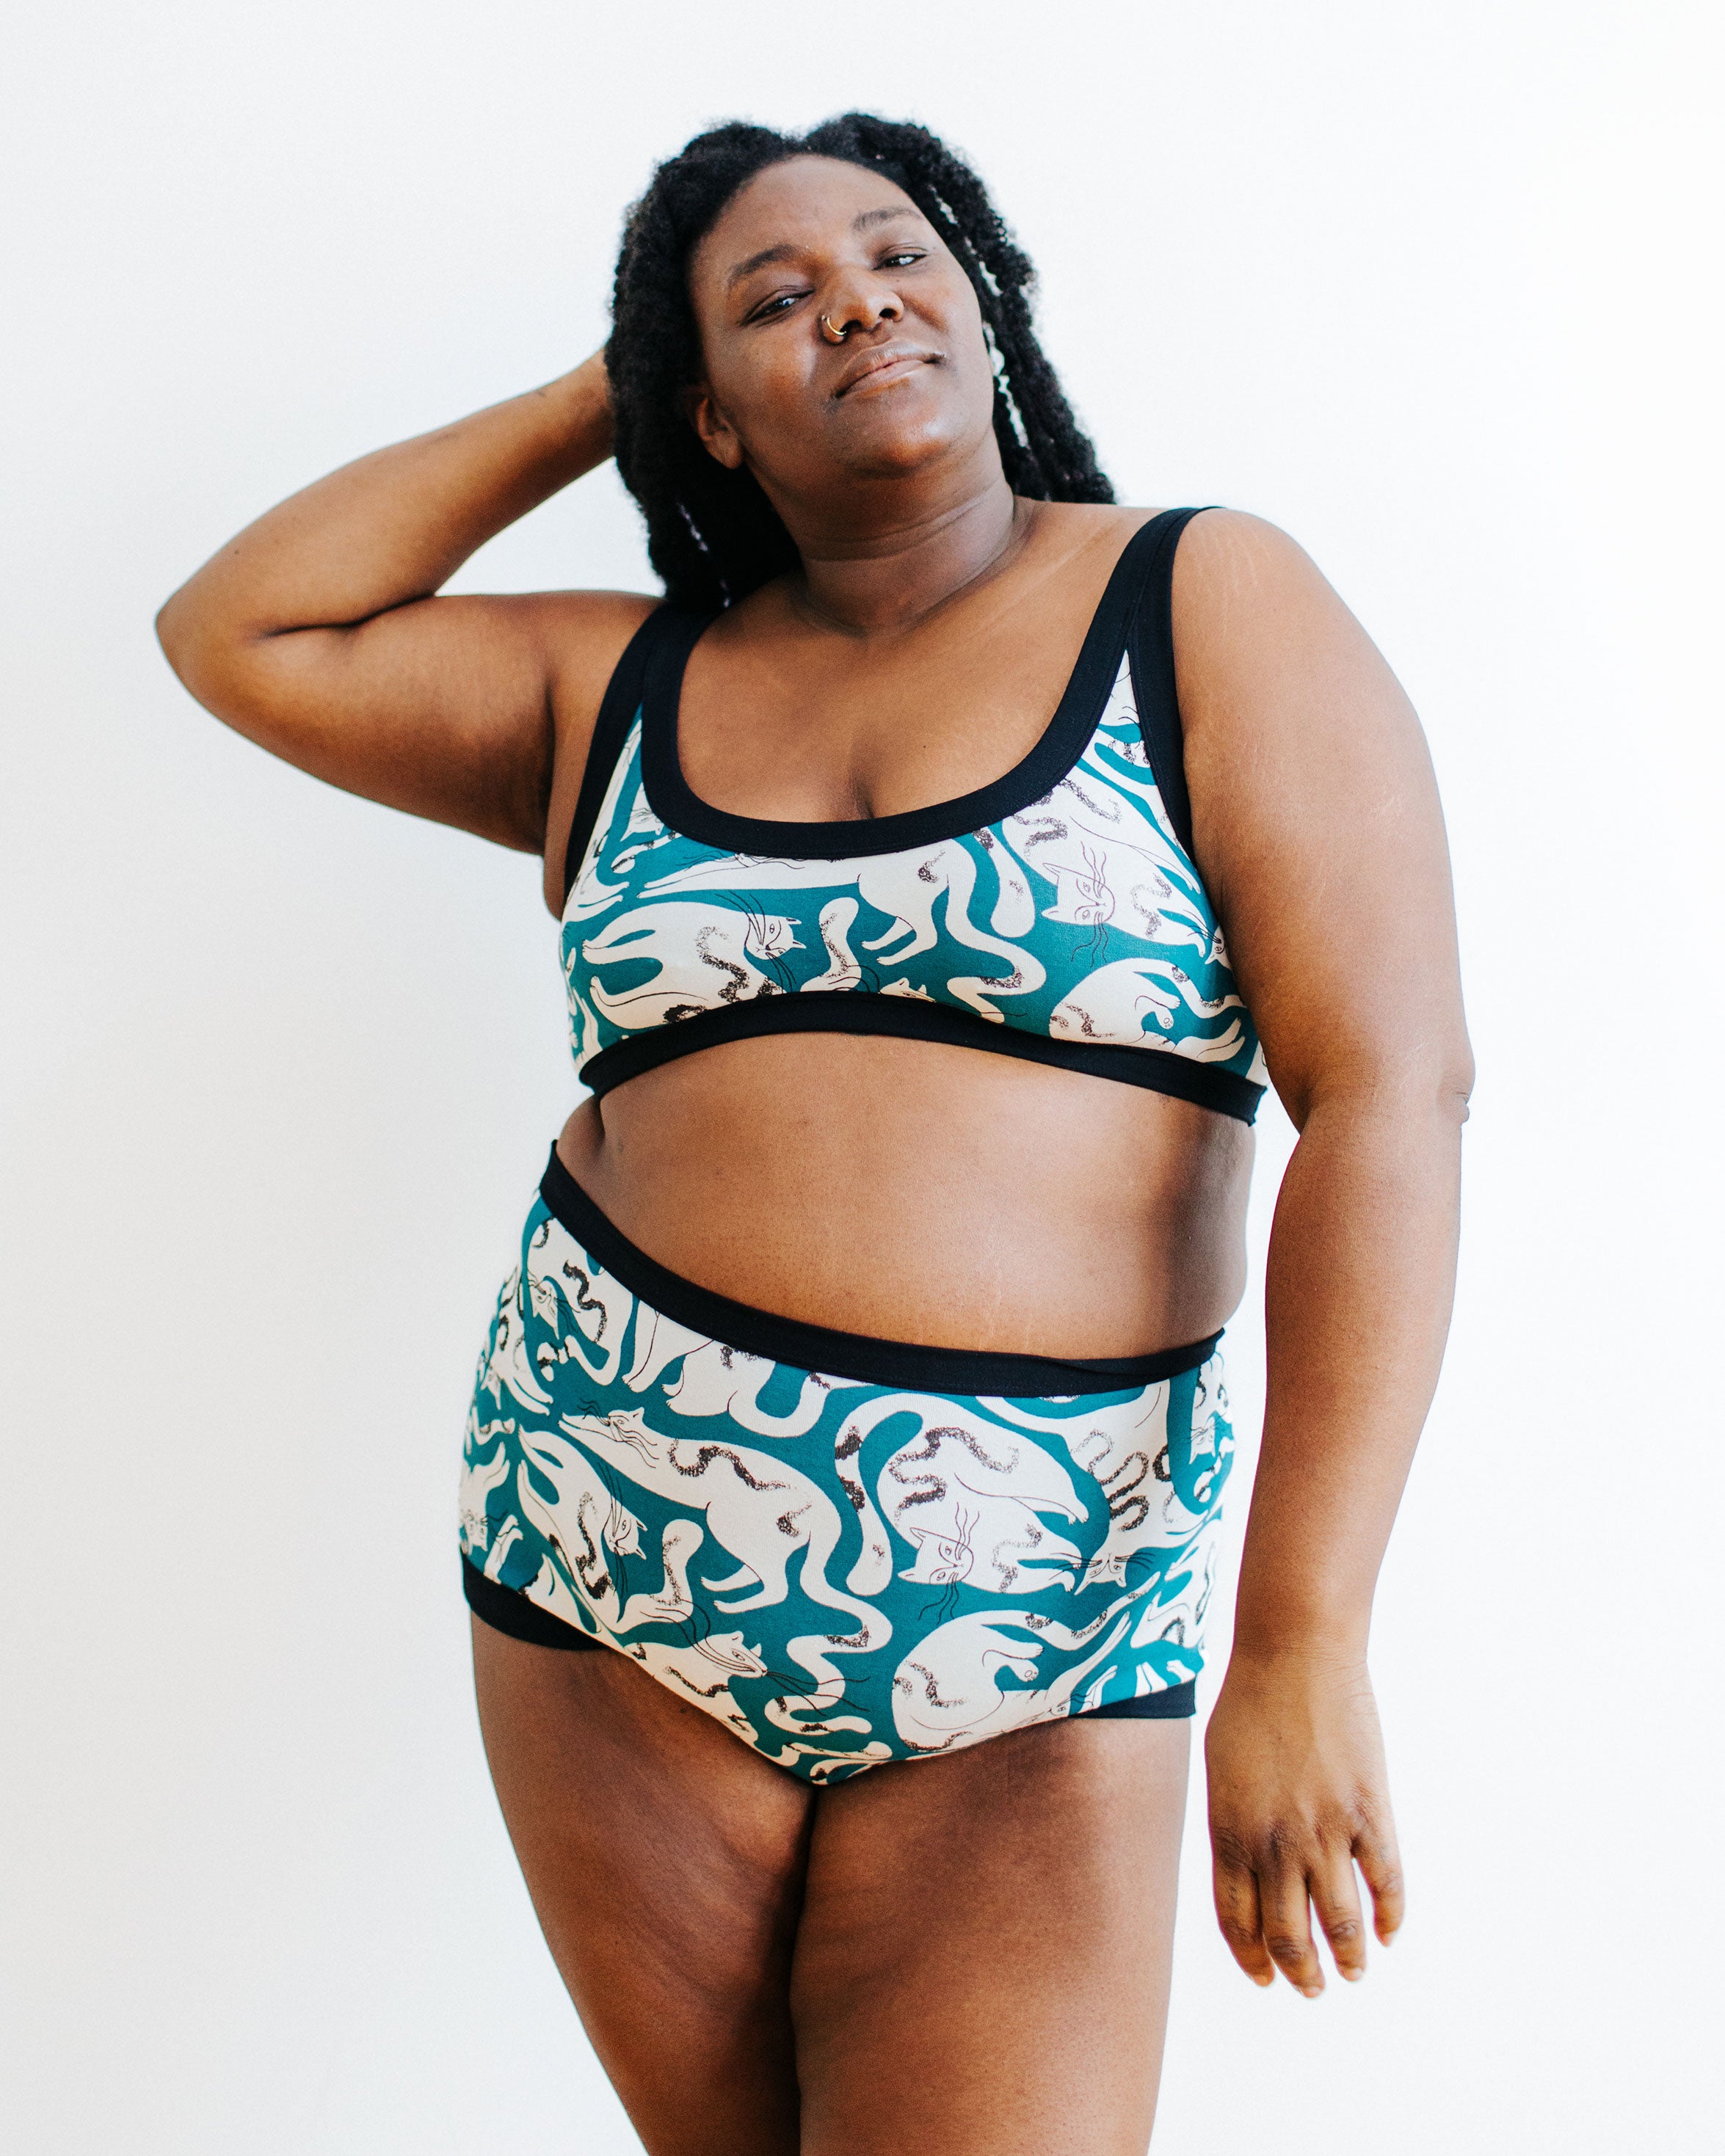 Model wearing Sky Rise style underwear and Bralette in Hey Meow! print - green with white cats.